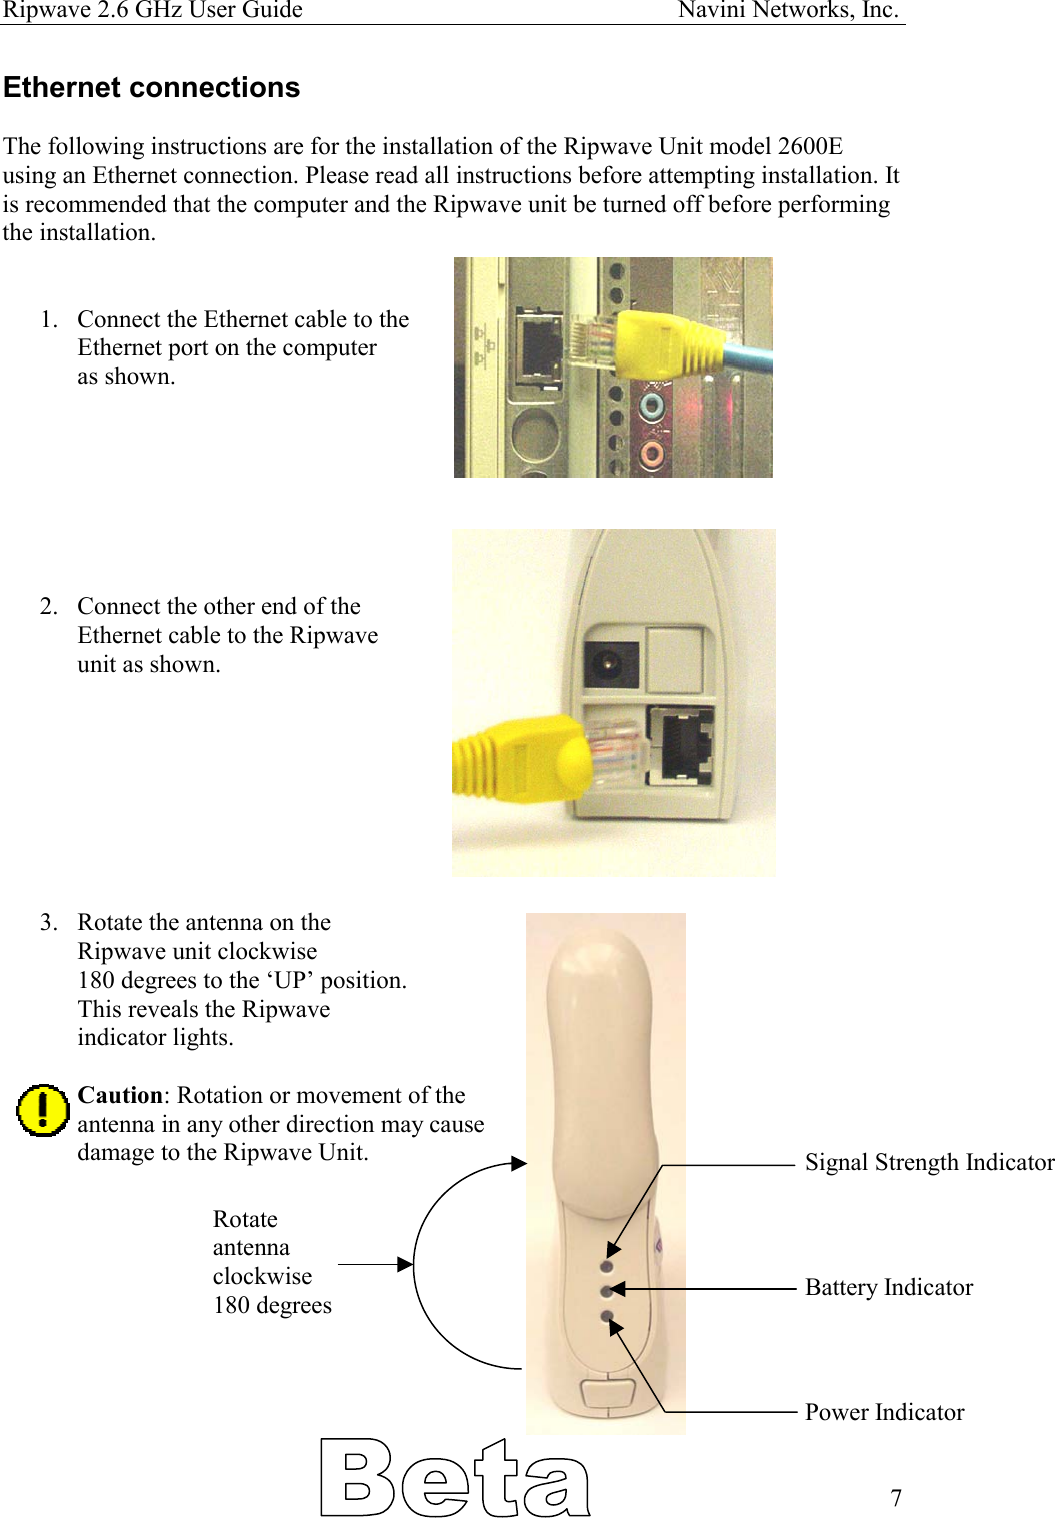 Ripwave 2.6 GHz User Guide                                                            Navini Networks, Inc. Ethernet connections  The following instructions are for the installation of the Ripwave Unit model 2600E using an Ethernet connection. Please read all instructions before attempting installation. It is recommended that the computer and the Ripwave unit be turned off before performing the installation.   1.  Connect the Ethernet cable to the Ethernet port on the computer as shown.        2.  Connect the other end of the  Ethernet cable to the Ripwave unit as shown.         3.  Rotate the antenna on the  Ripwave unit clockwise 180 degrees to the ‘UP’ position. This reveals the Ripwave  indicator lights.   Caution: Rotation or movement of the  antenna in any other direction may cause damage to the Ripwave Unit.  Rotate  antenna clockwise 180 degrees Signal Strength Indicator    Battery Indicator     Power Indicator   7